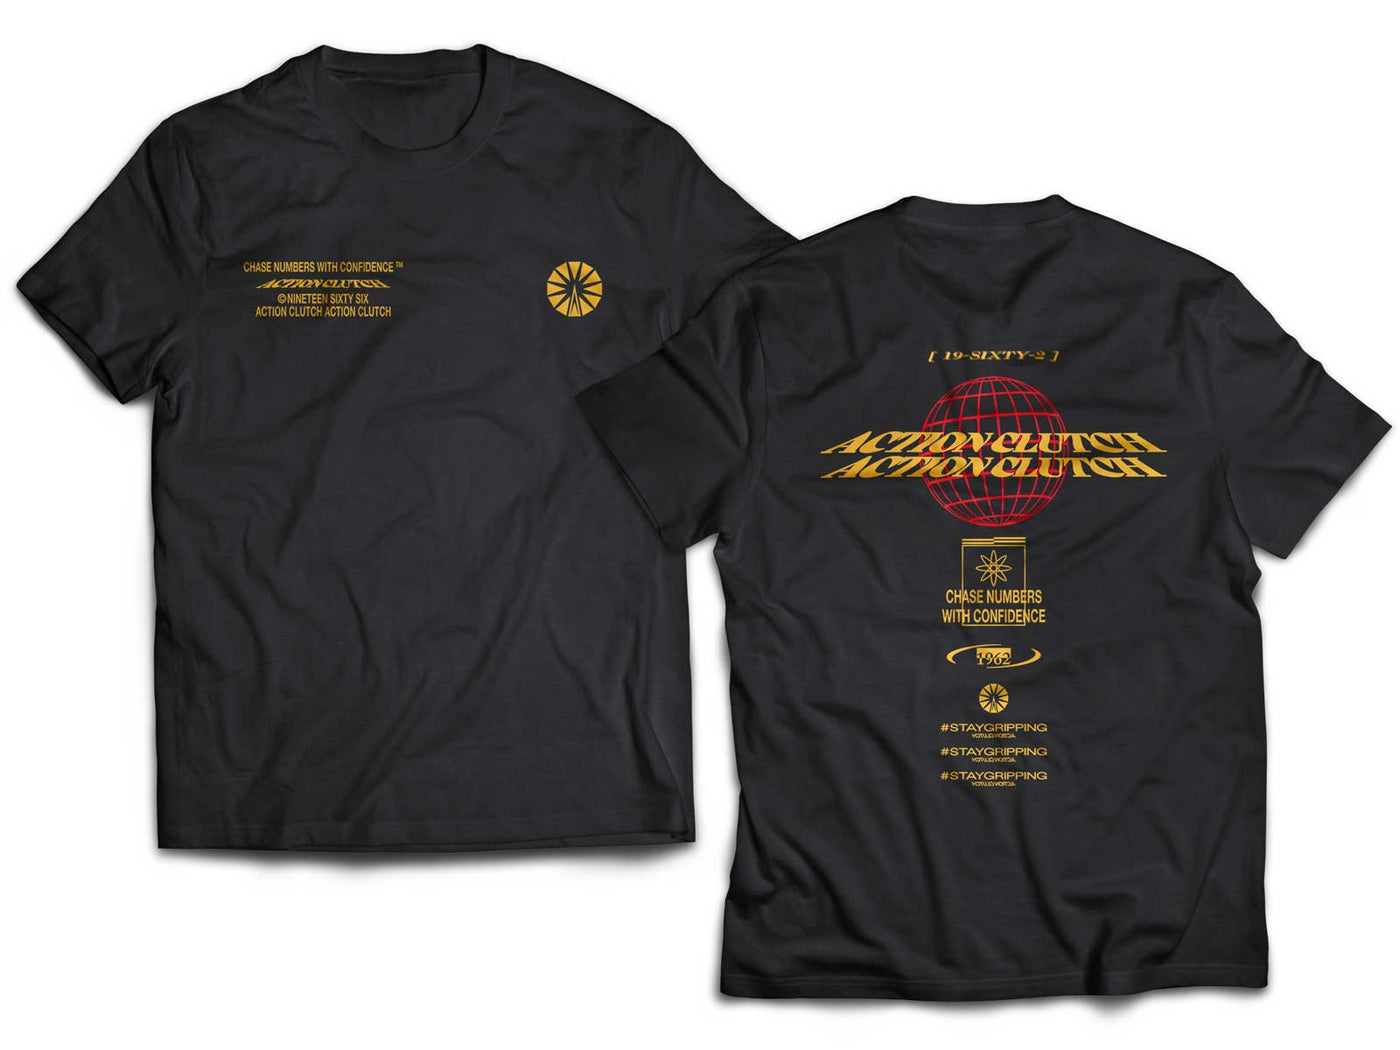 Action Clutch Stay Gripping 2.0 T-Shirt